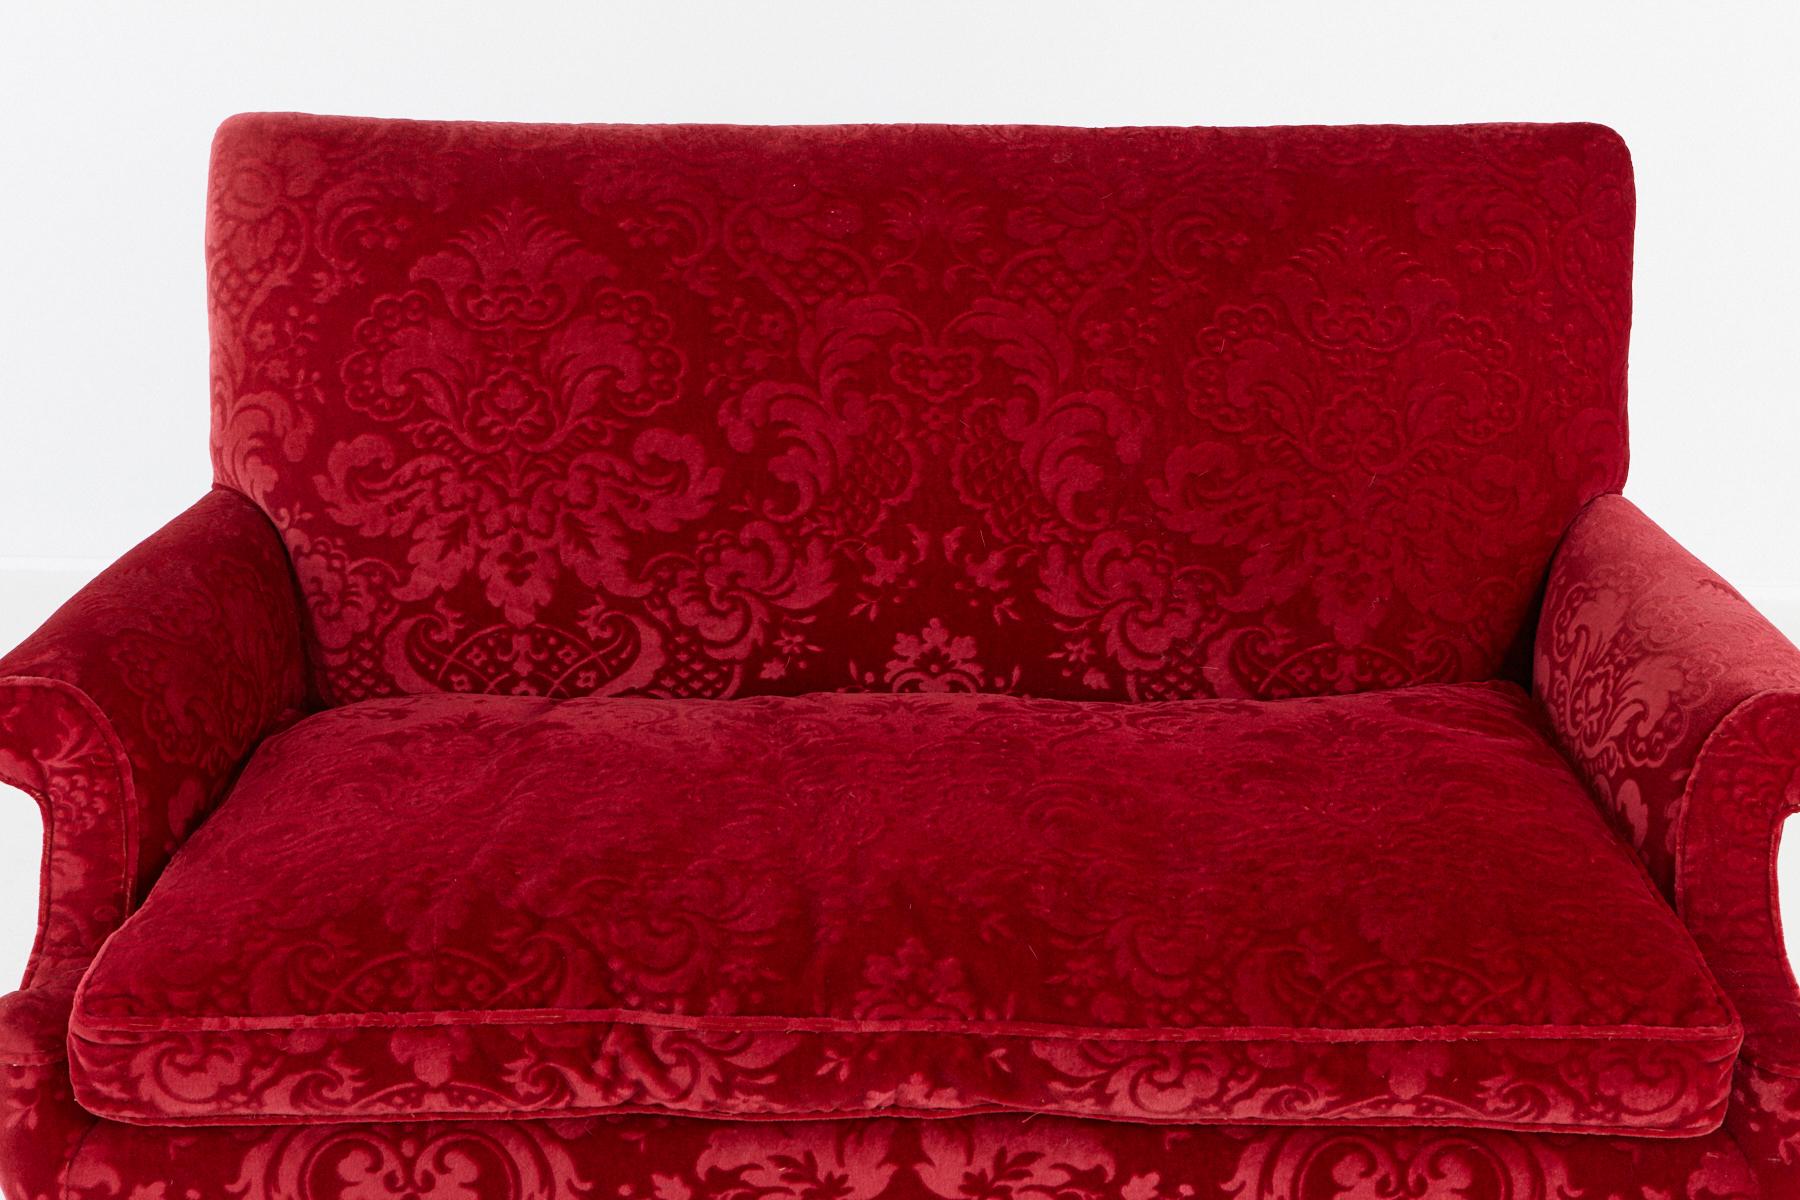 Victorian Sofa in Red Embossed Acanthus Ornament Mohair Upholstery No 2 of 2 2